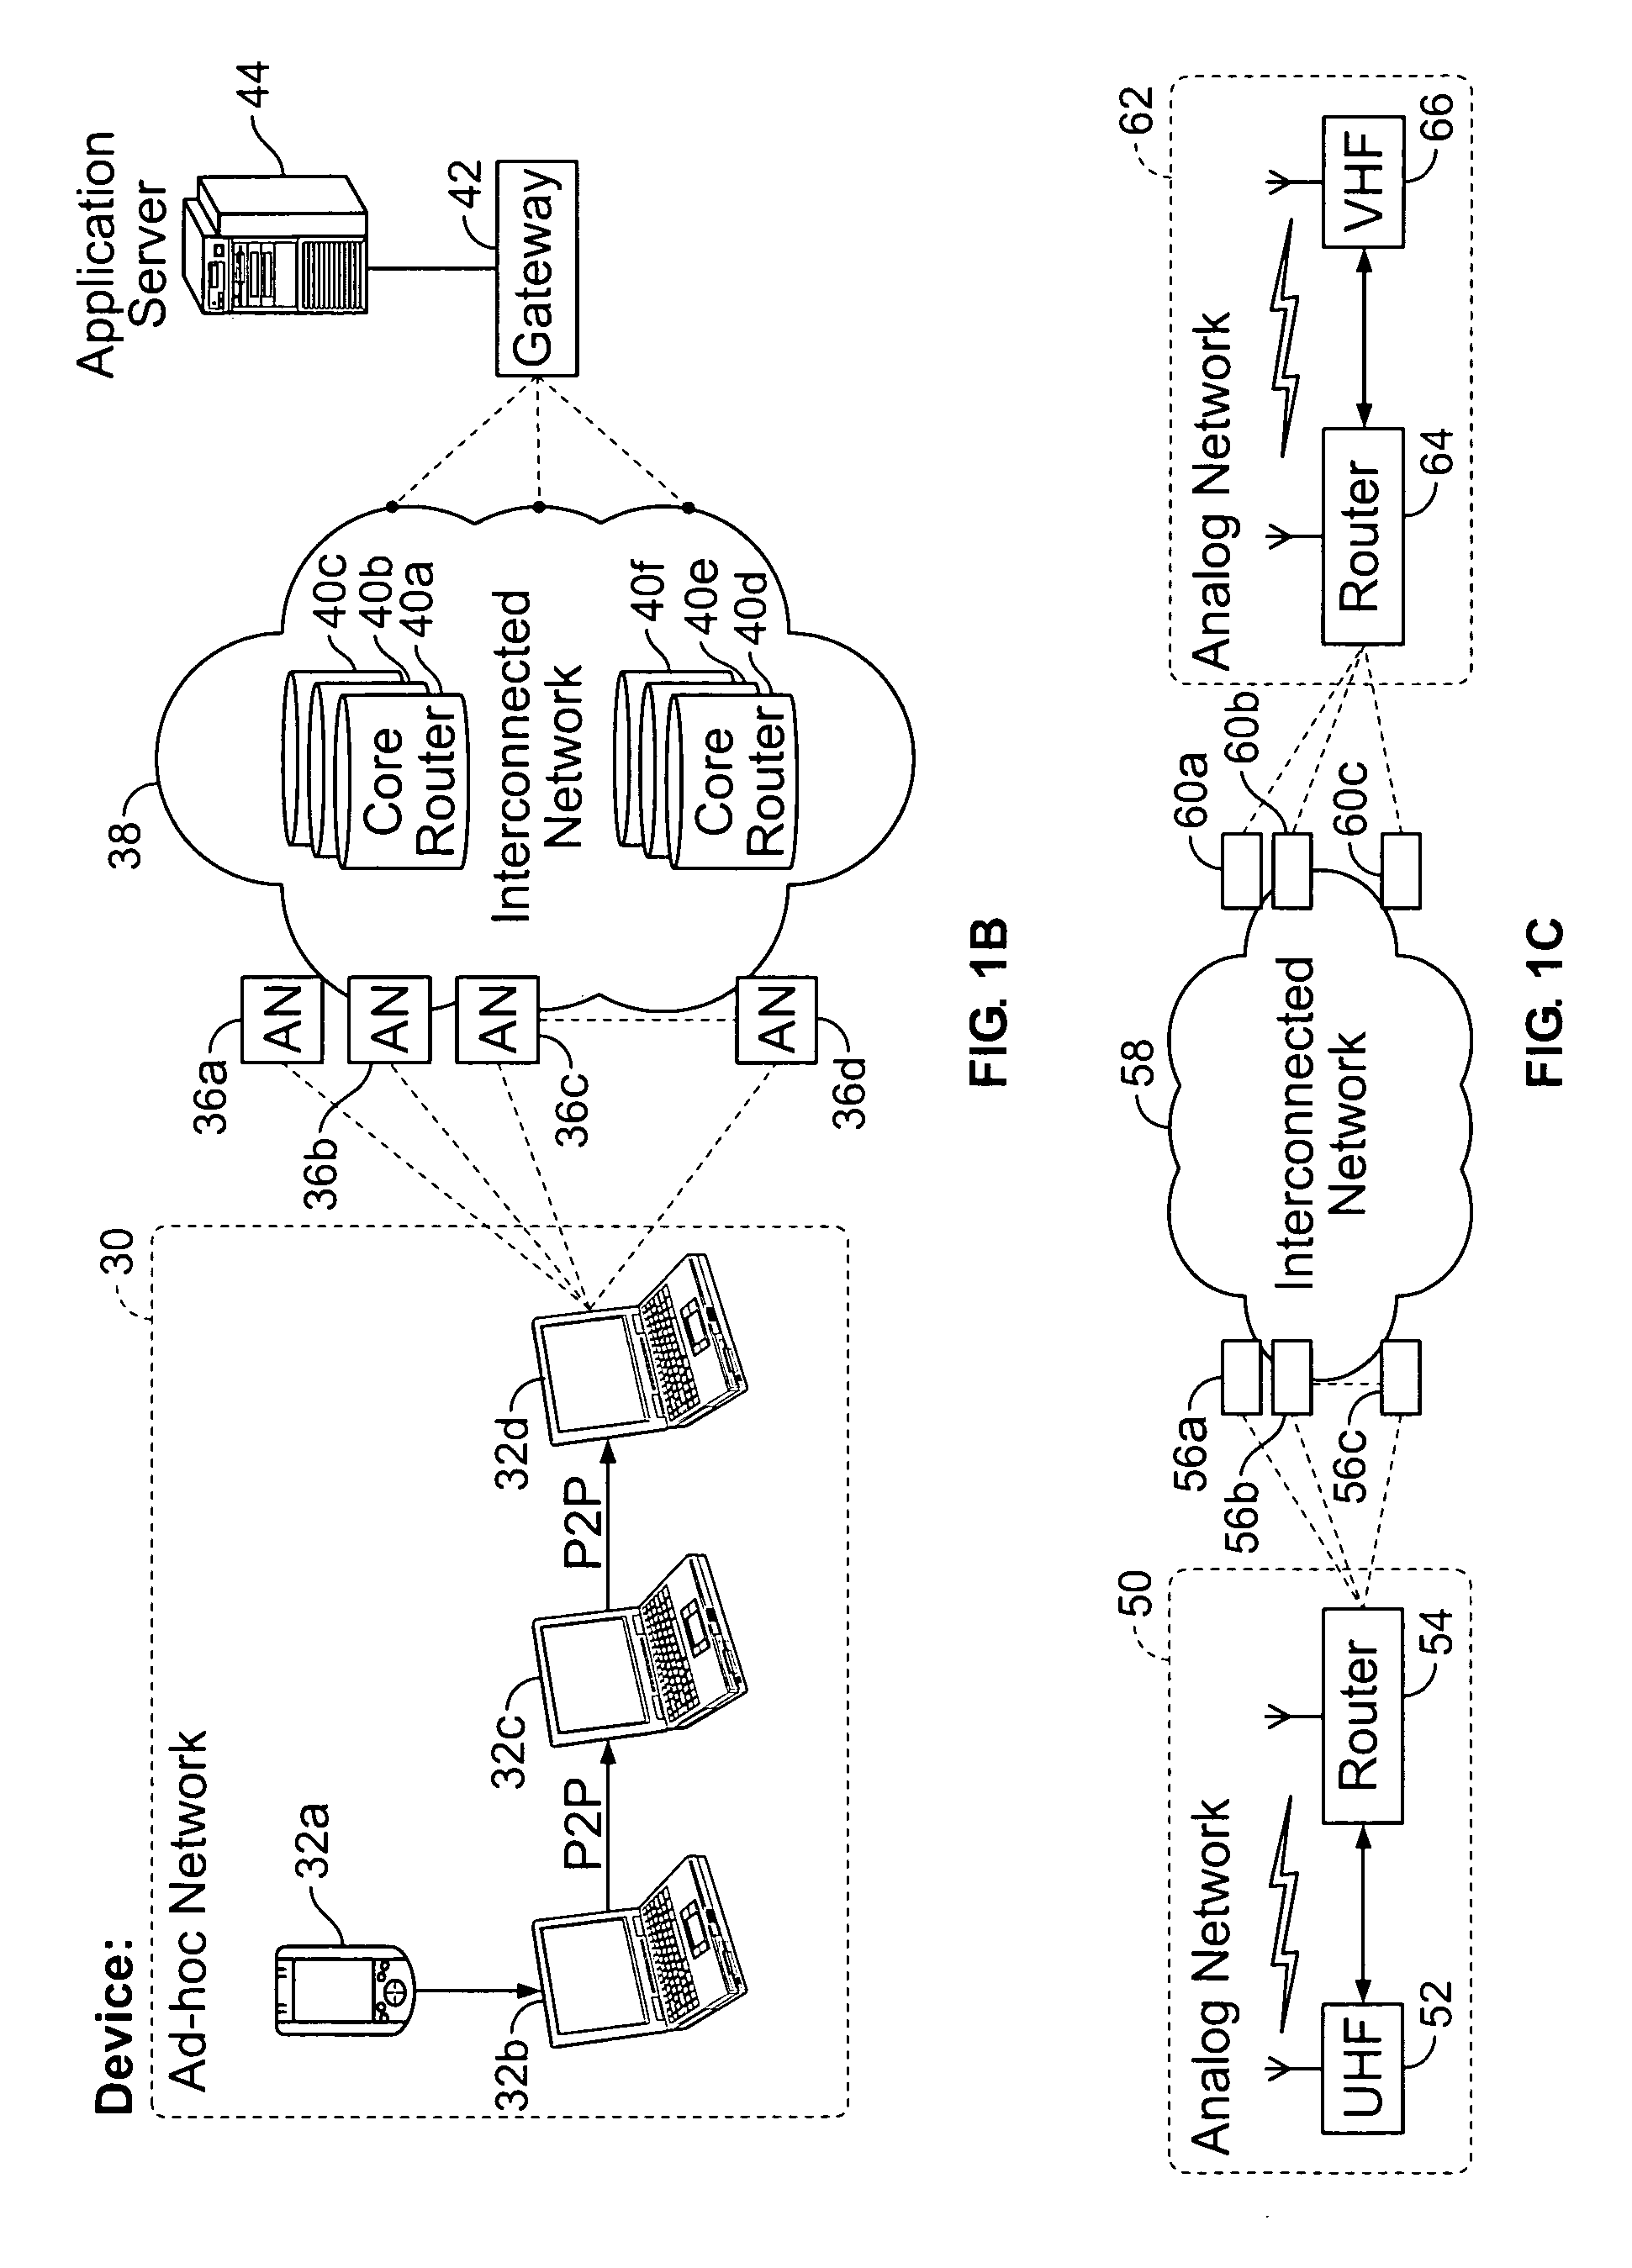 Multi-access terminal with capability for simultaneous connectivity to multiple communication channels